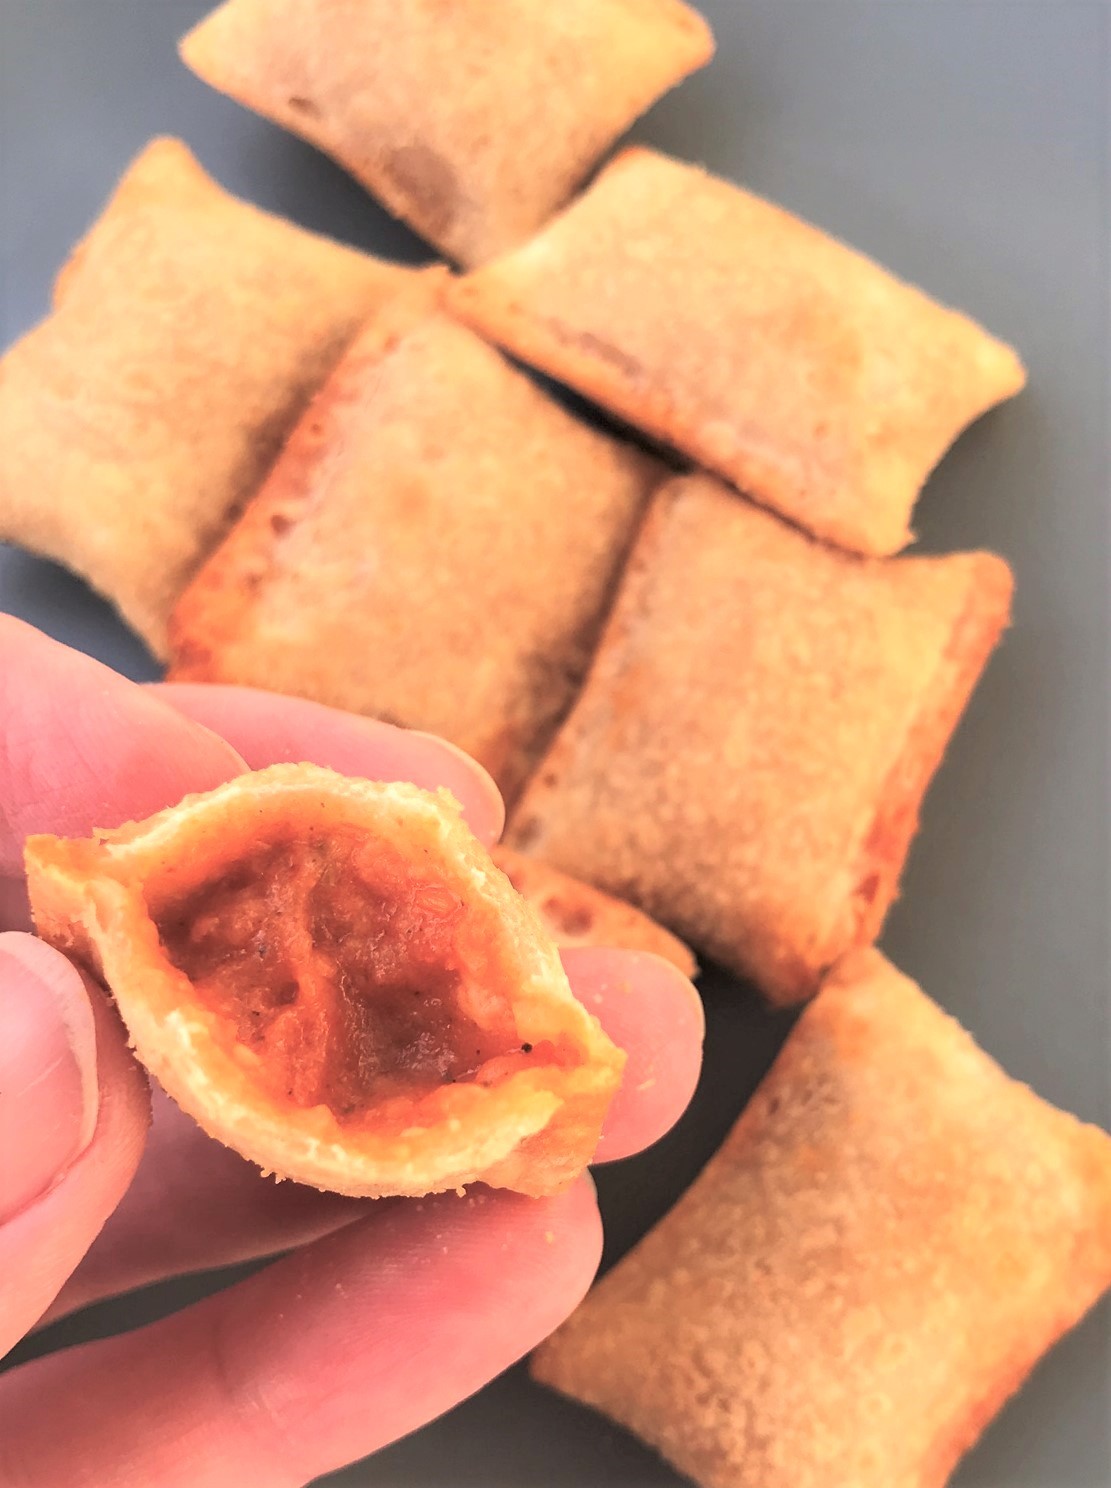 inside of pizza roll cooked in an air fryer